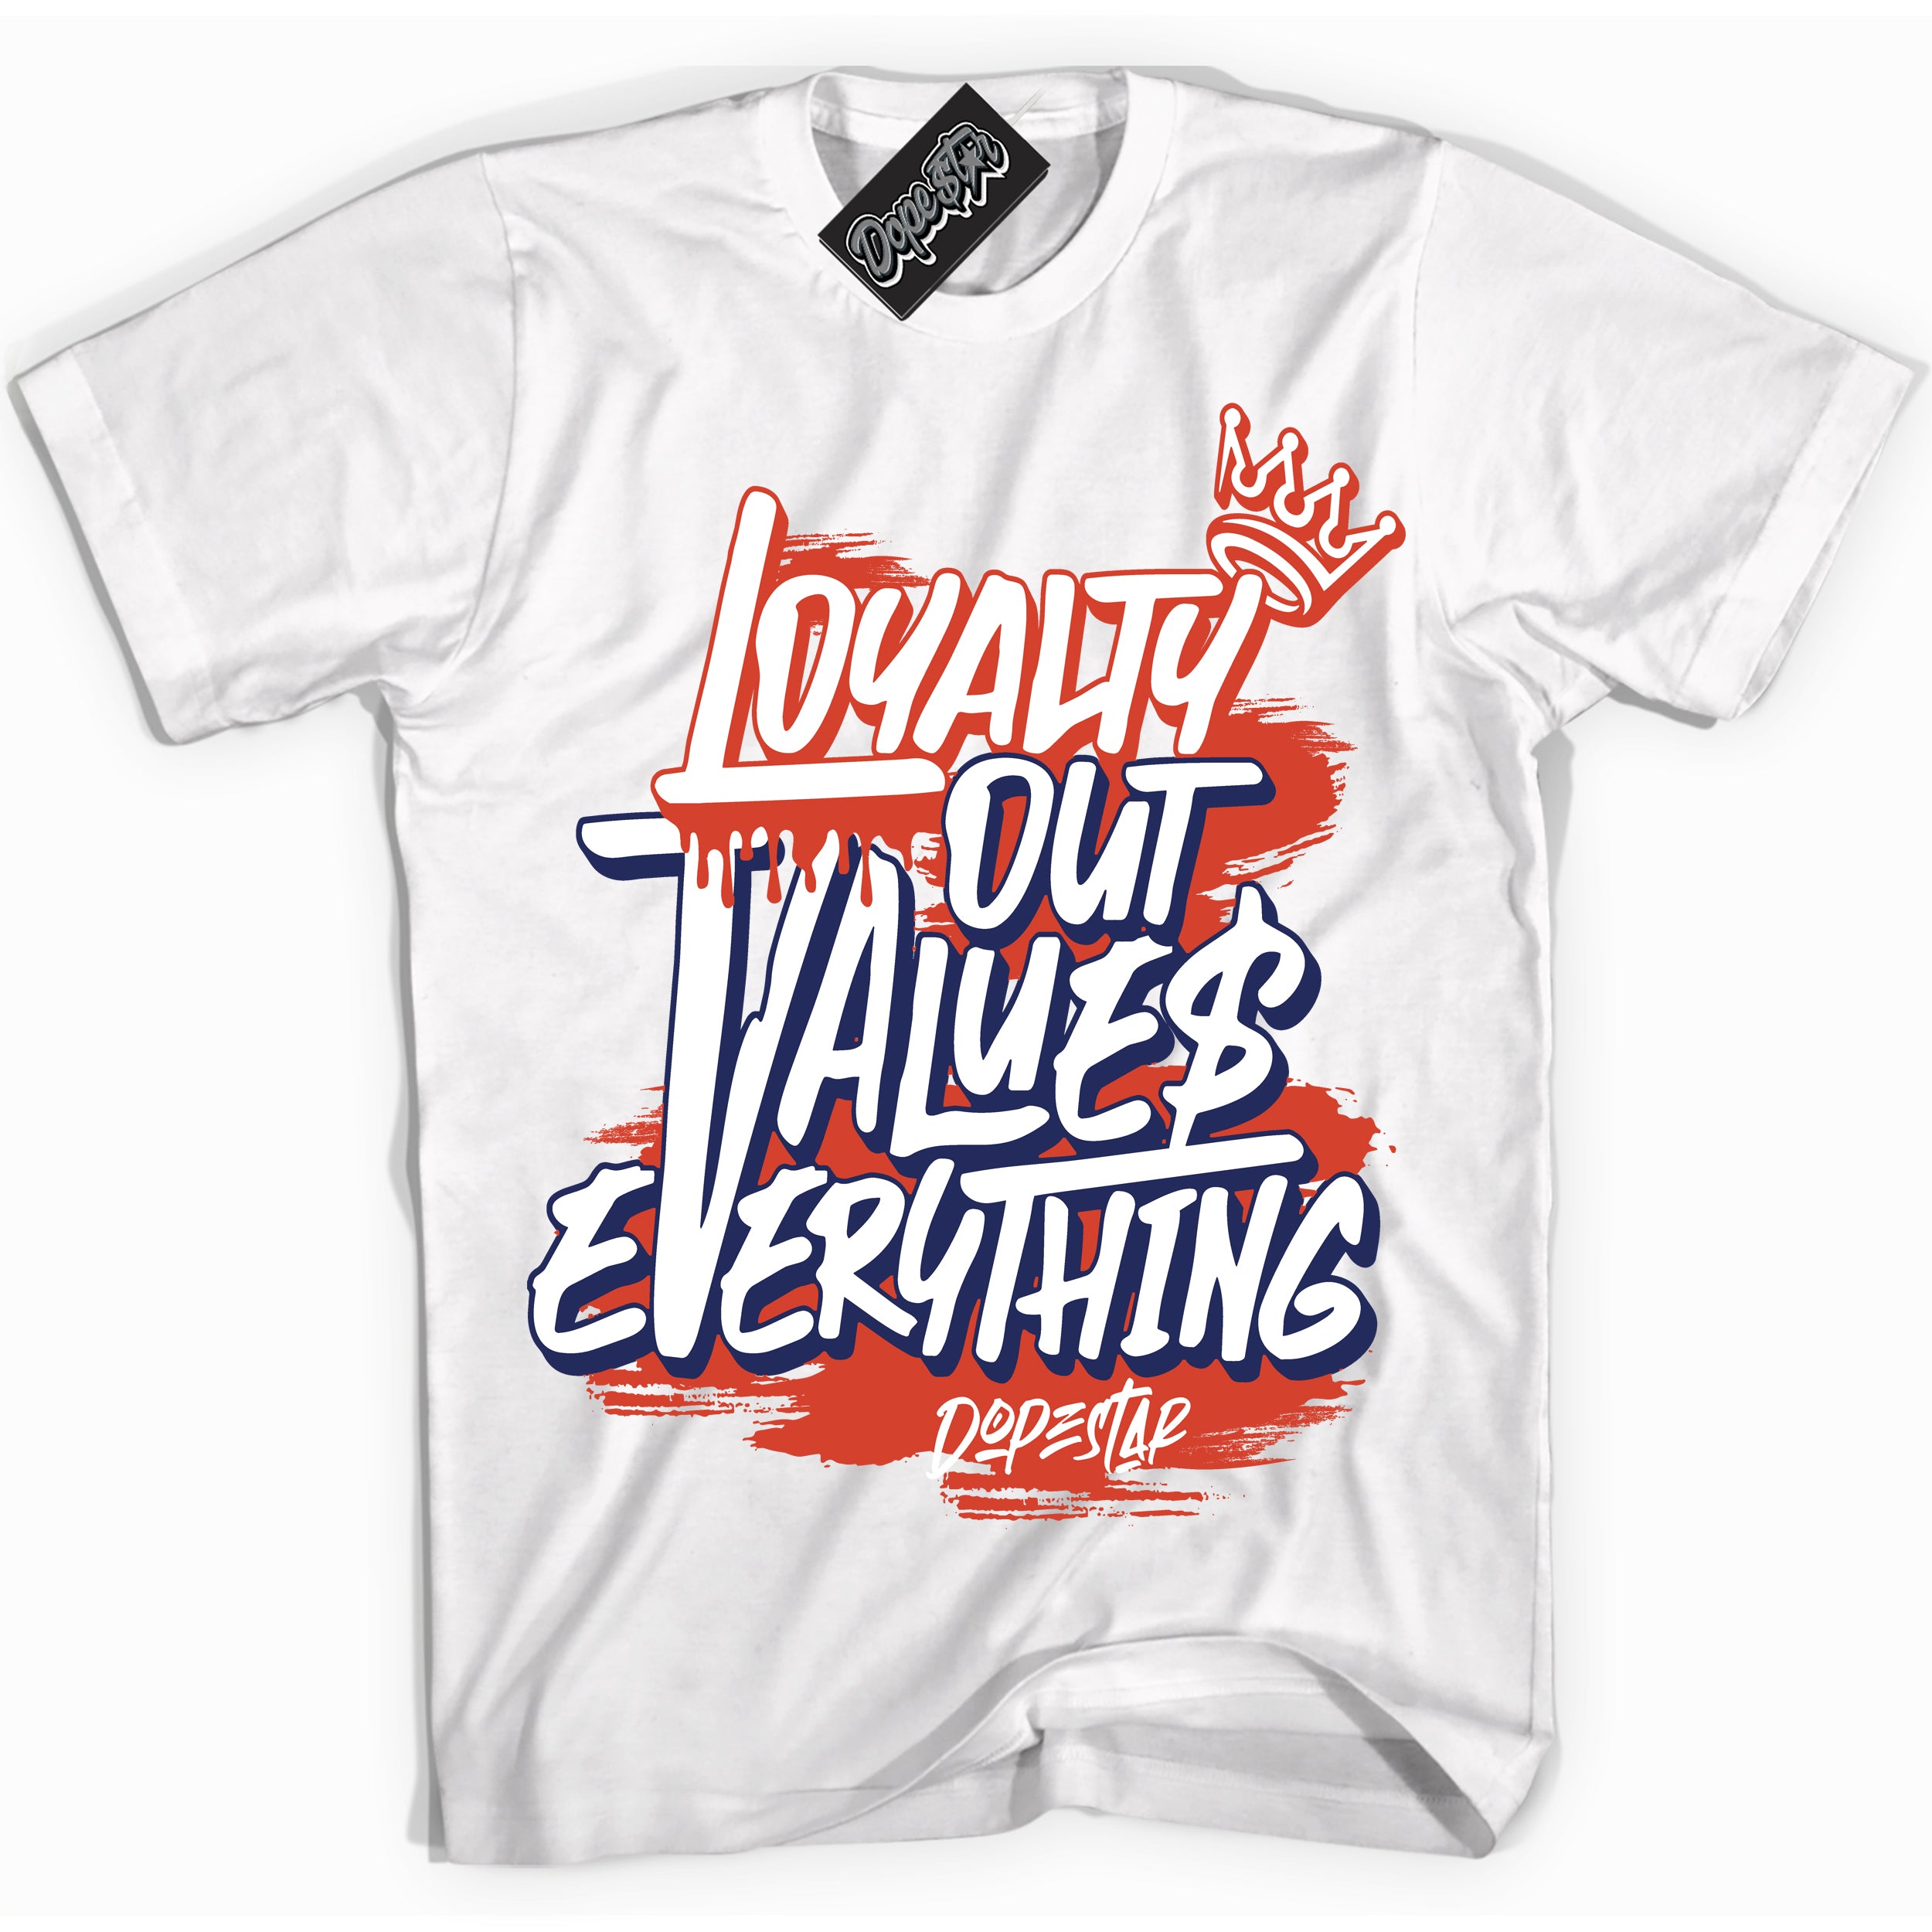 Cool White Shirt with “ Loyalty Out Values Everything” design that perfectly matches Knicks Sneakers.